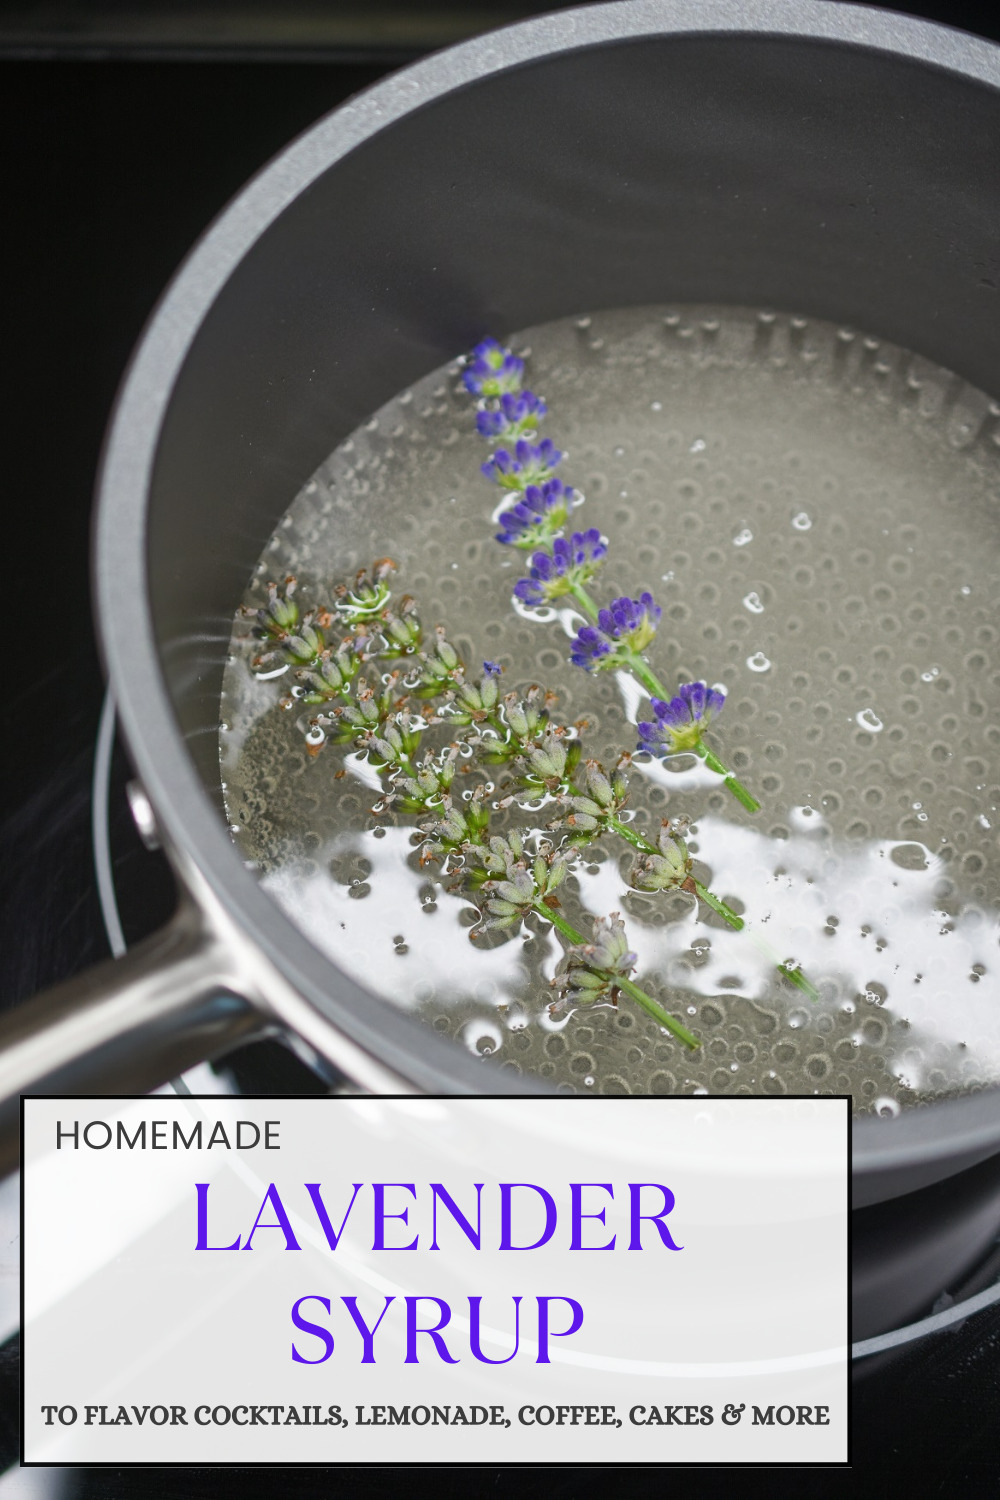 Lavender Syrup is just 3 ingredients to make and a delicious way to flavor cocktails, lemonade, drinks, cakes and more!